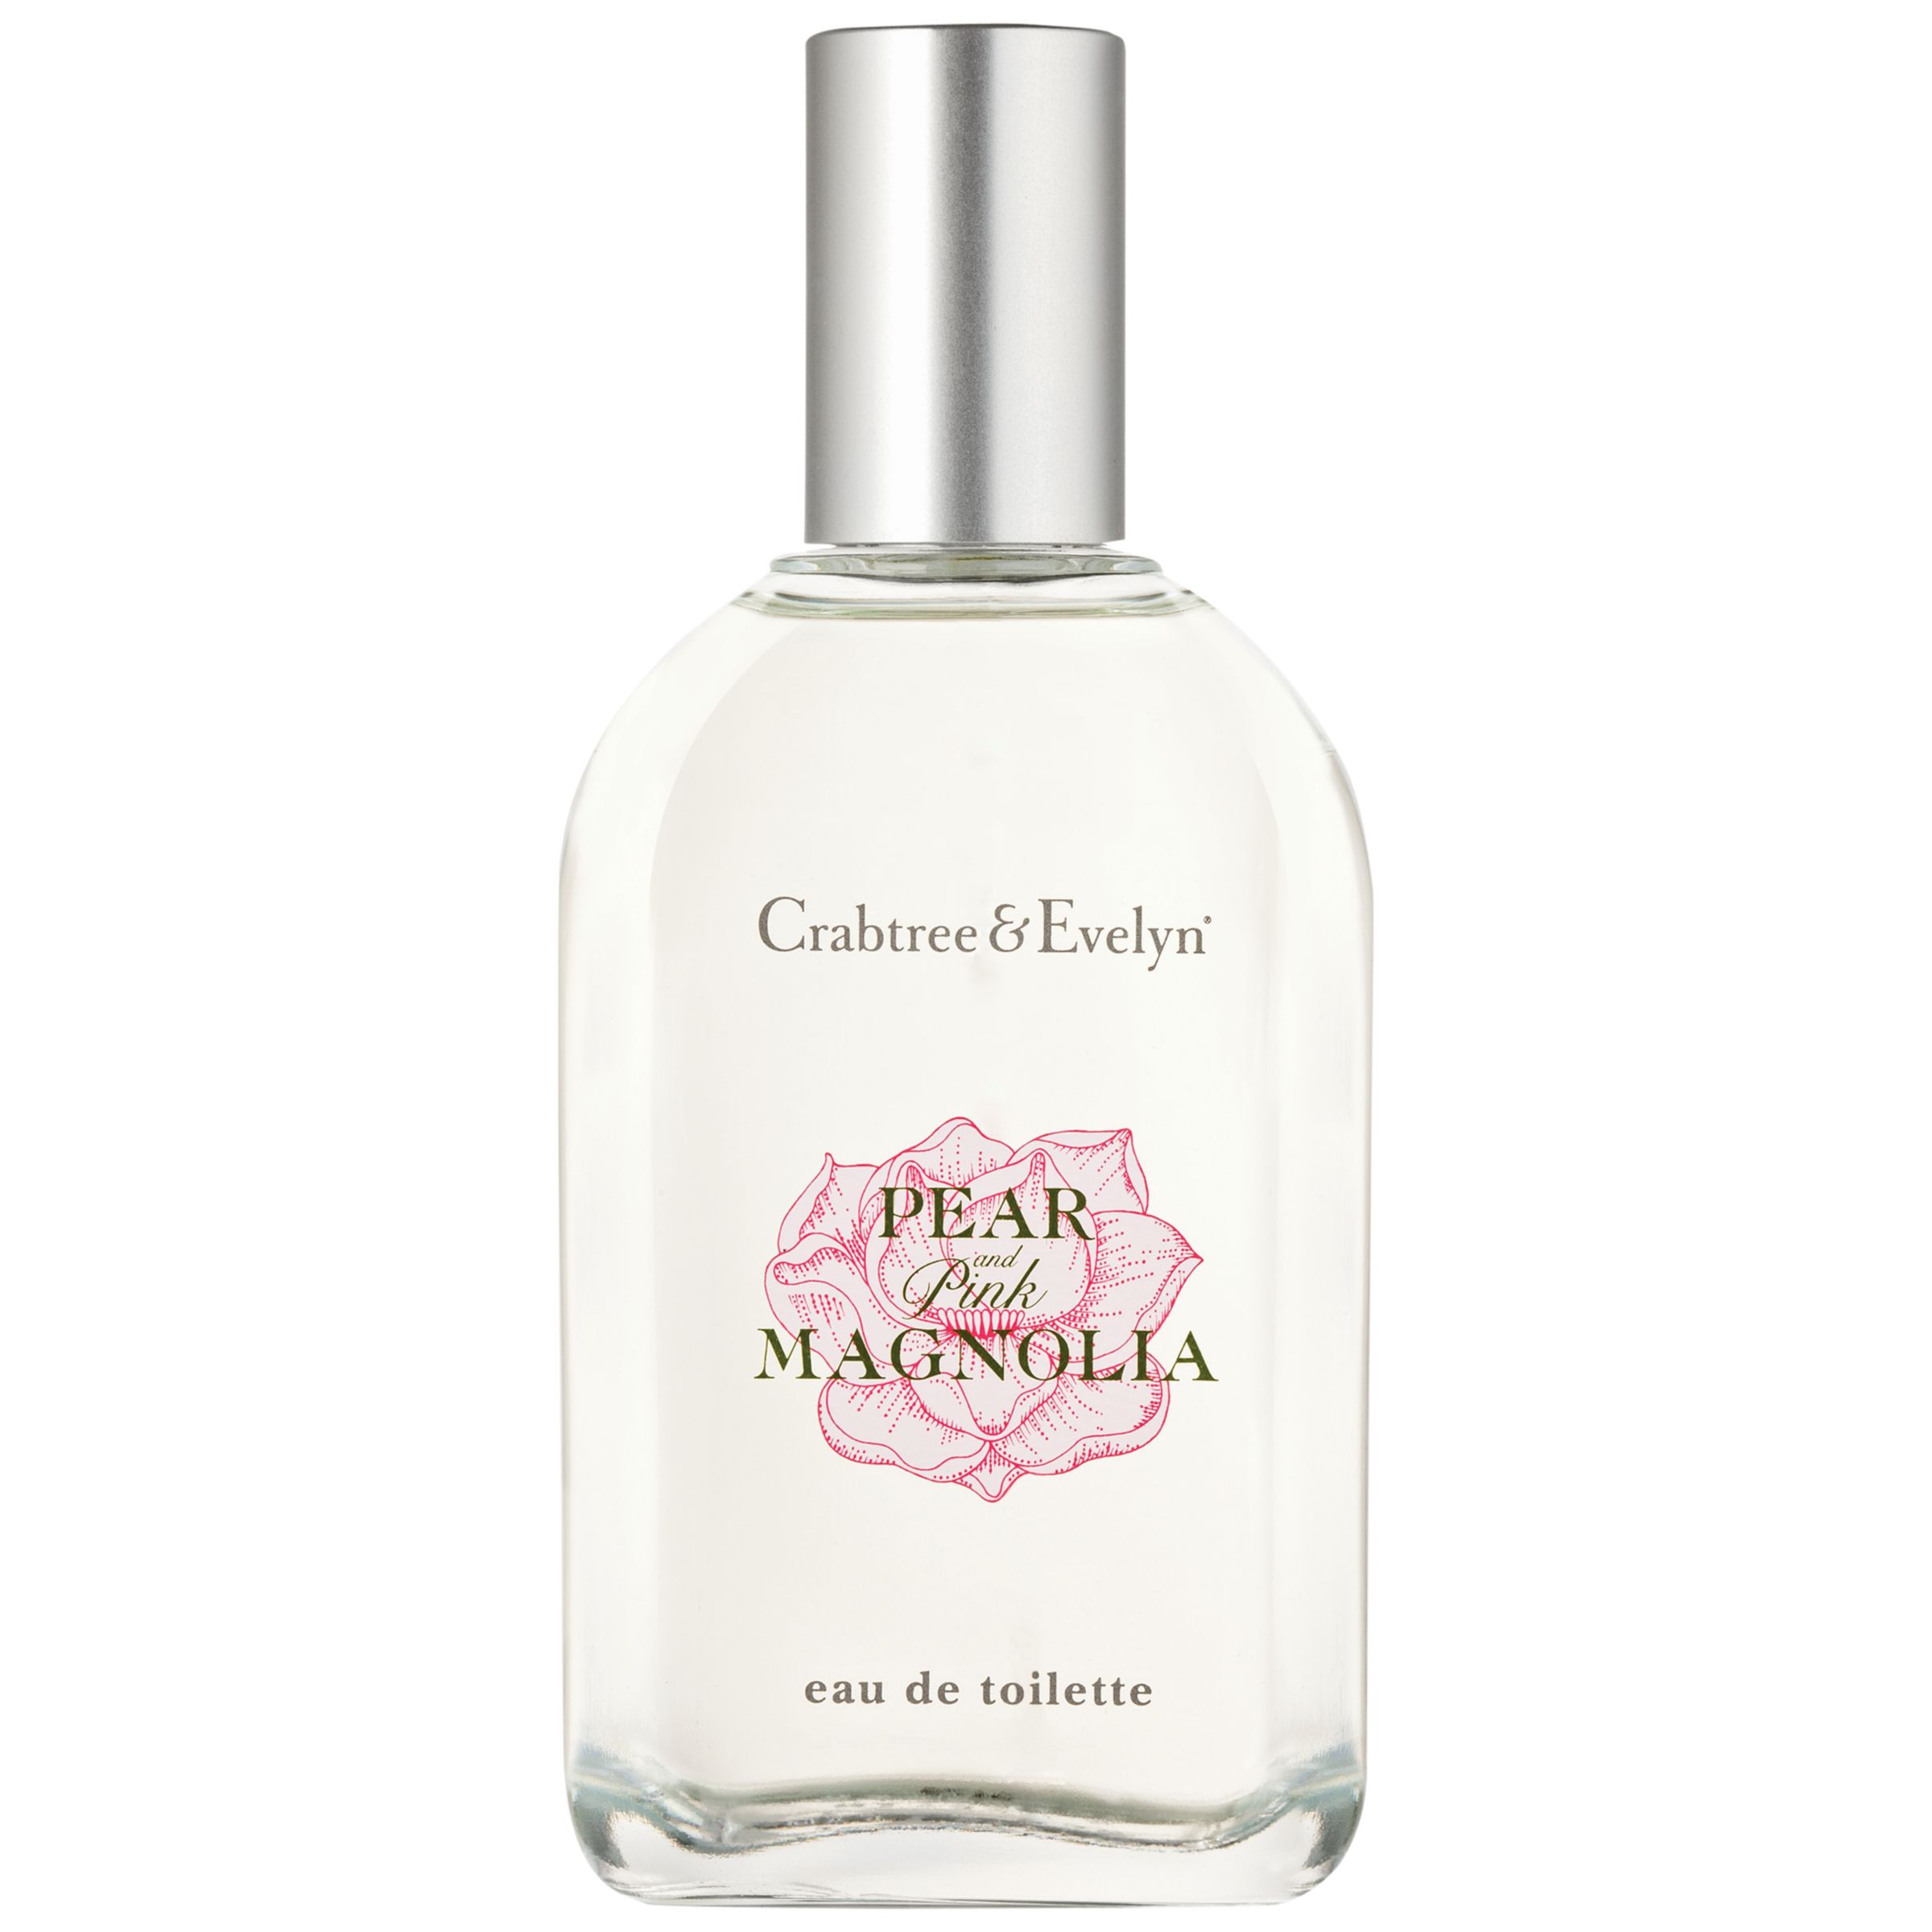 crabtree and evelyn pear and pink magnolia eau de toilette